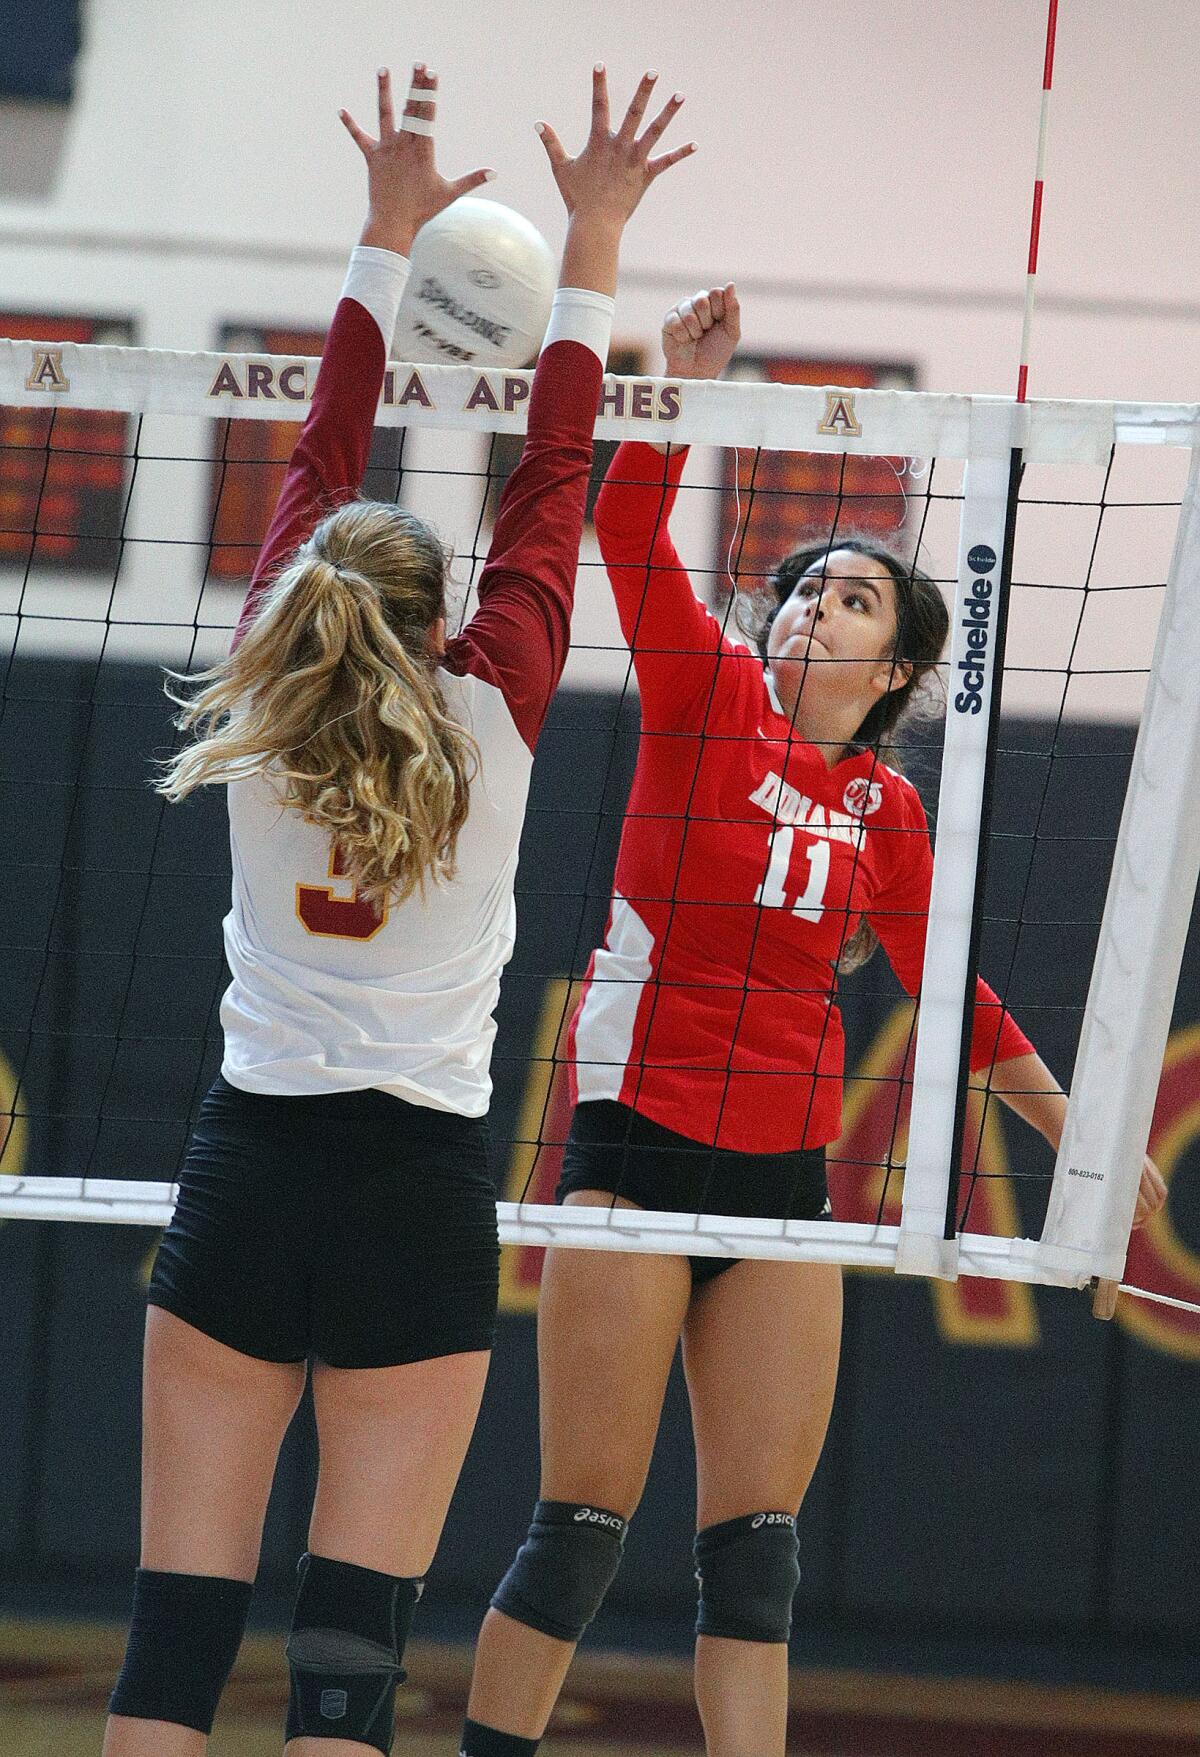 Burroughs' Catie Virtue hits the ball past Arcadia's Ashley Marron in a Pacific League girls' volleyball match at Arcadia High School on Thursday, September 19, 2019. (Tim Berger / Staff Photographer)